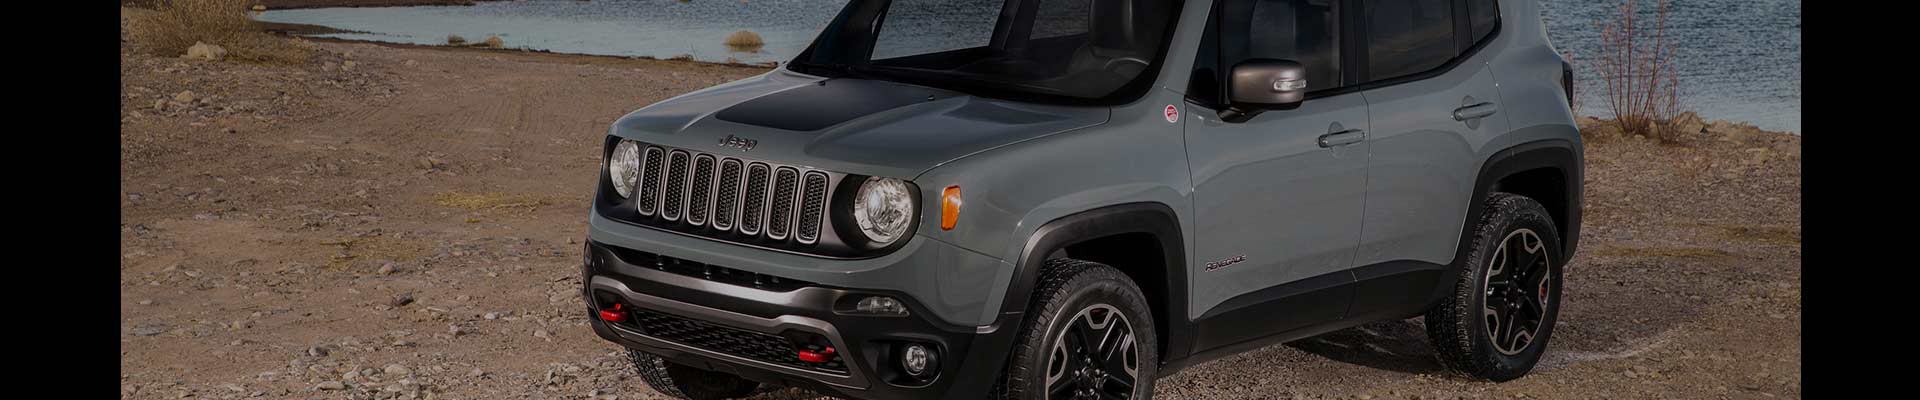 Shop Replacement and OEM 2019 Jeep Renegade Parts with Discounted Price on the Net